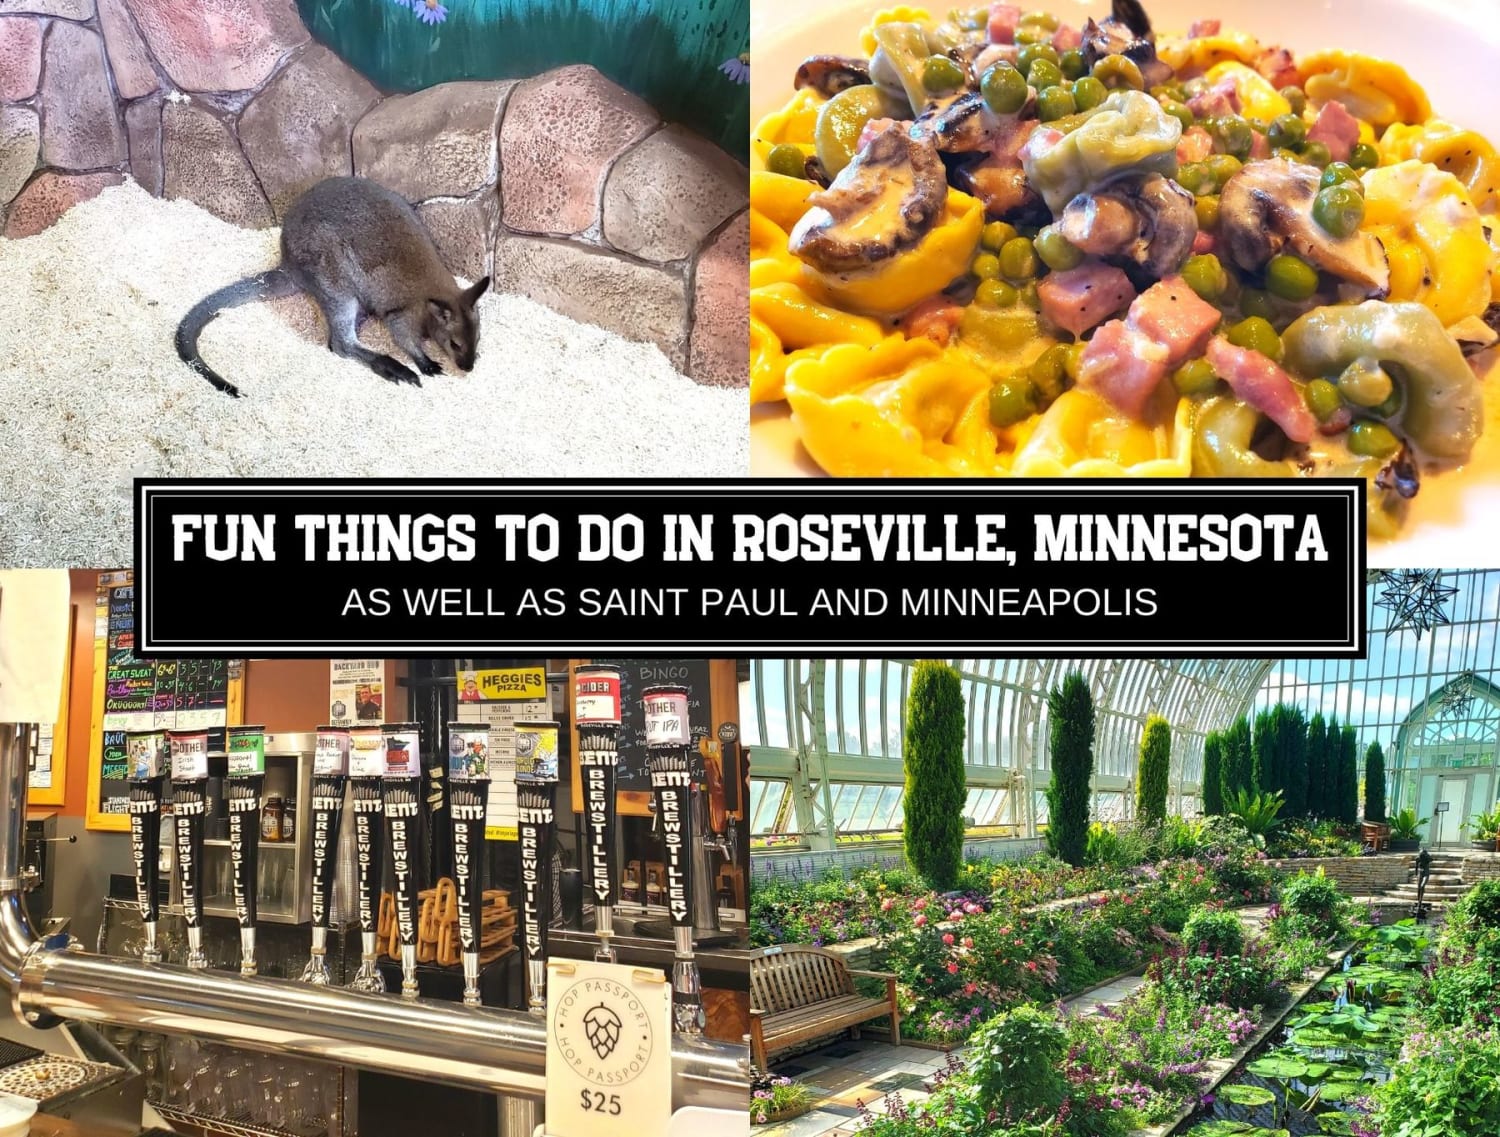 Fun Things To Do In Roseville, Minnesota